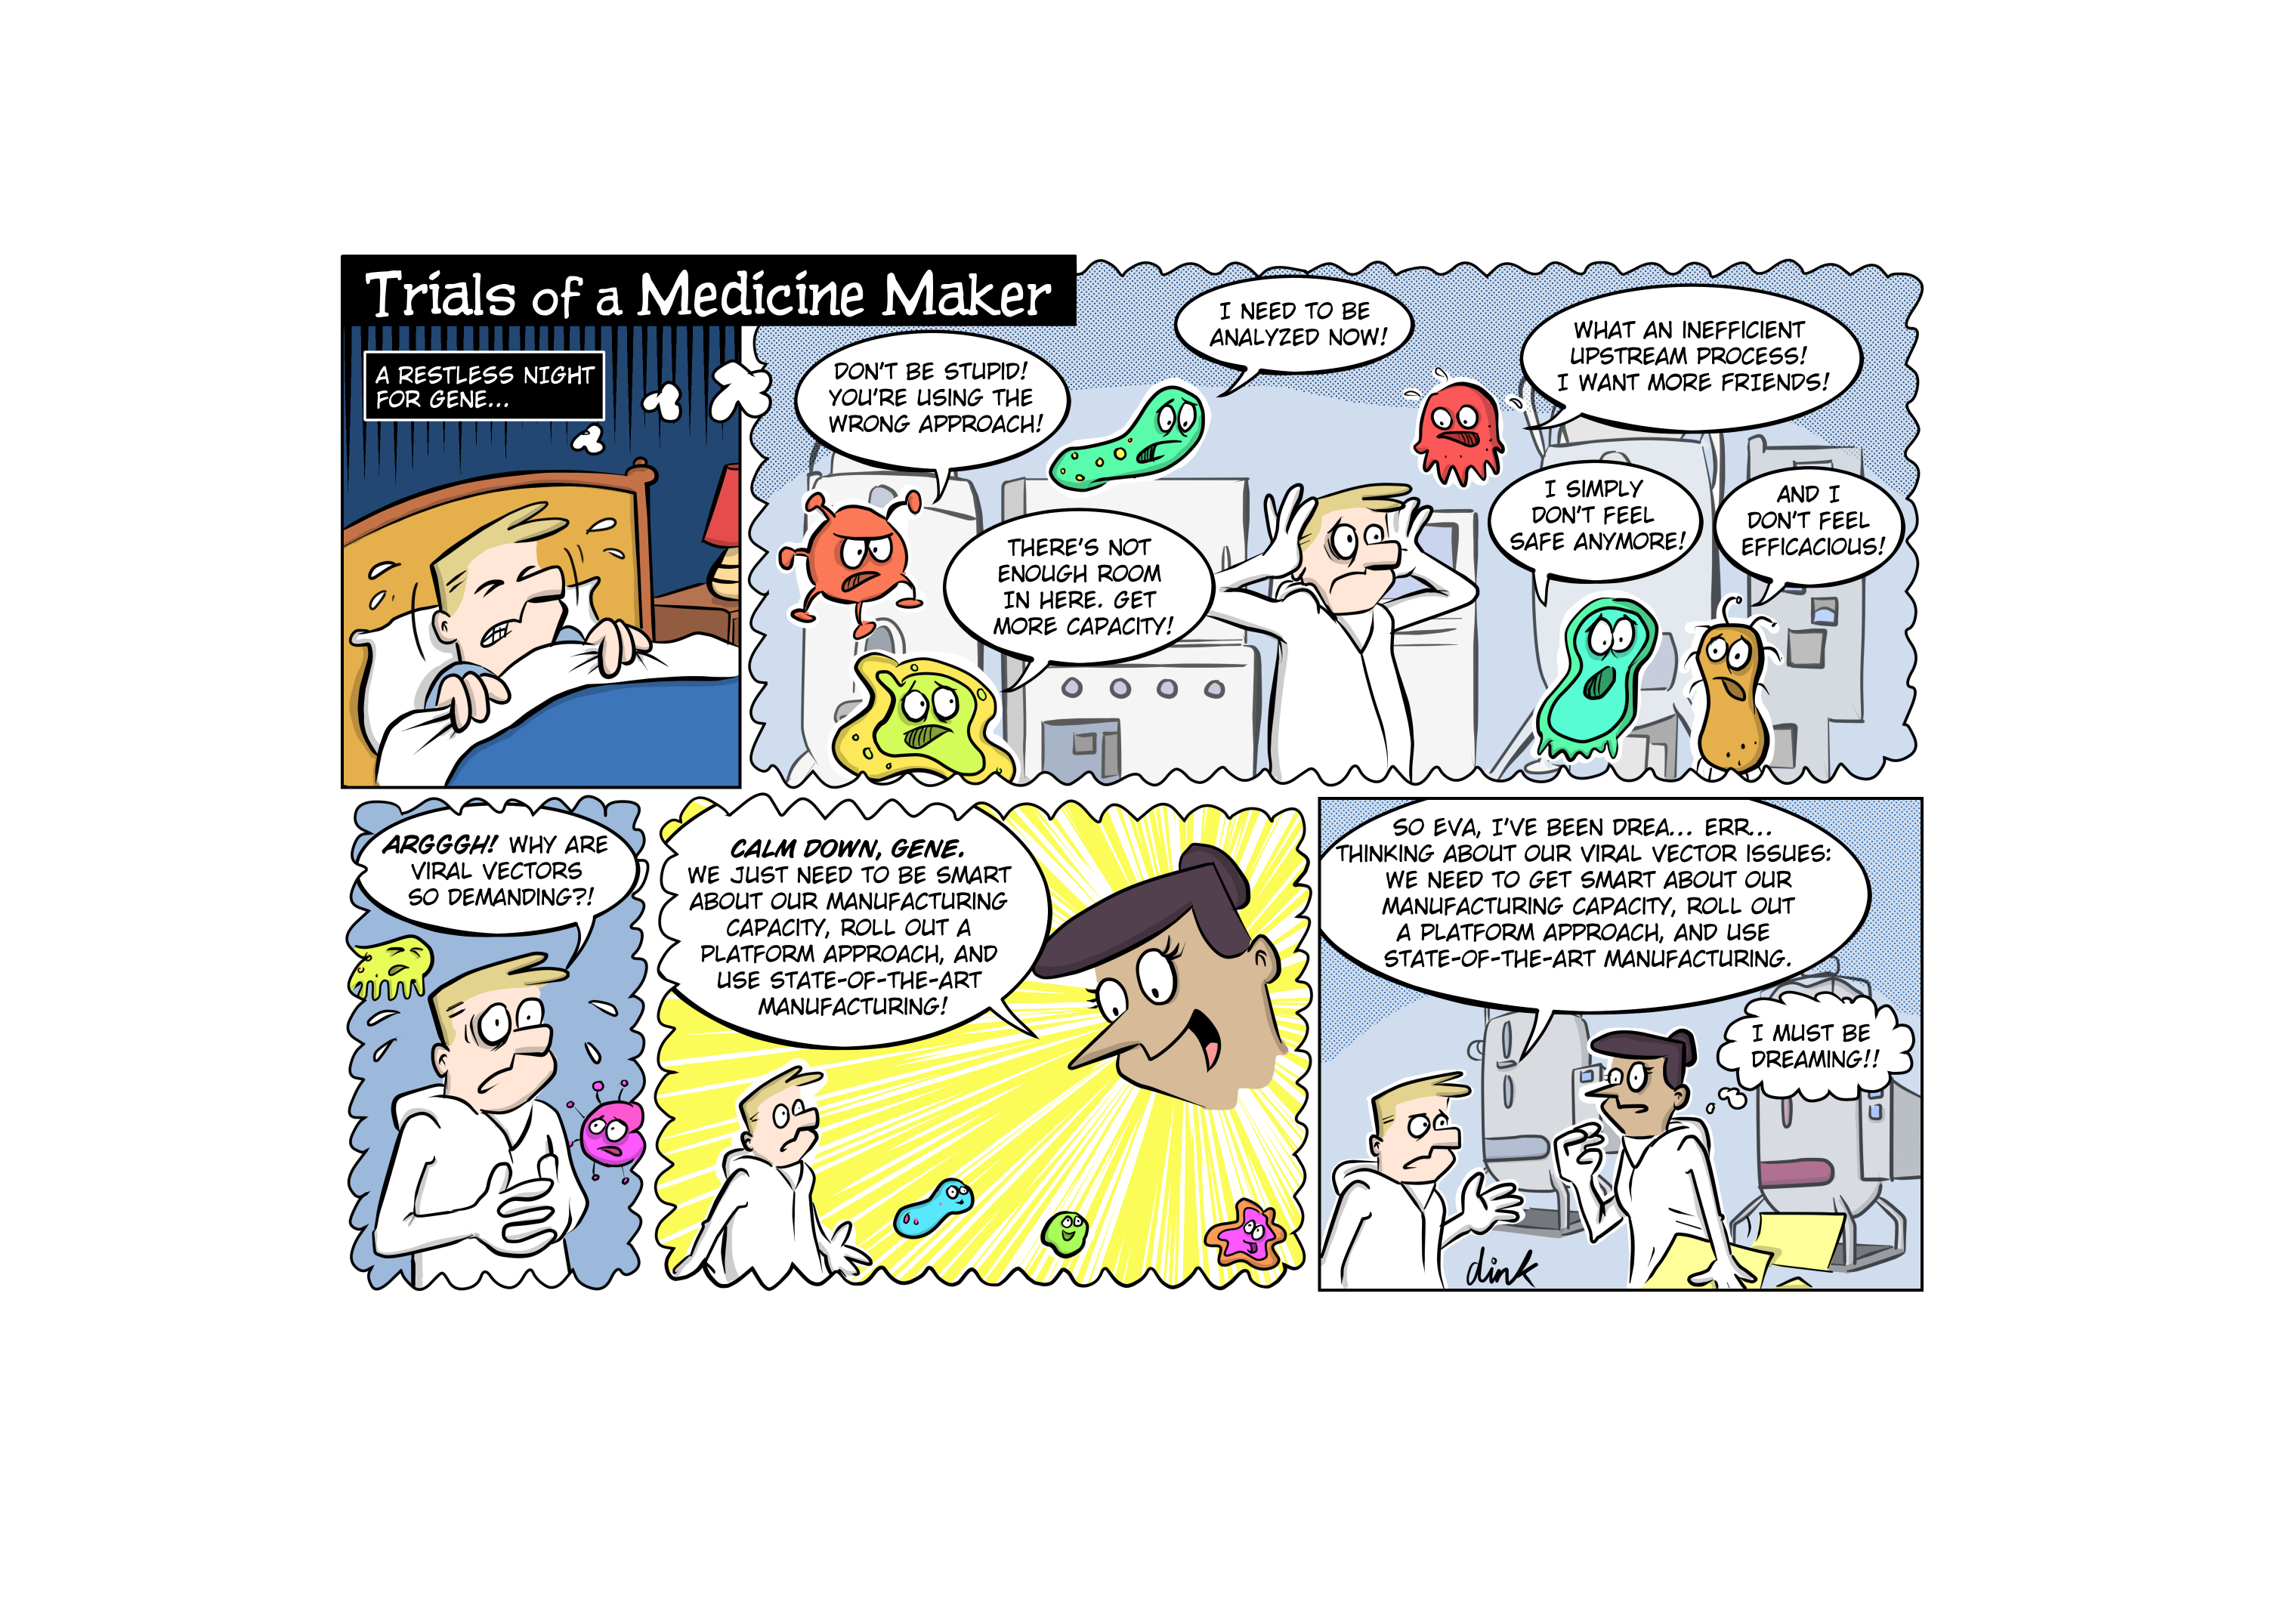 Bioprocessing cartoon on viral vectors for gene therapy and biopharma